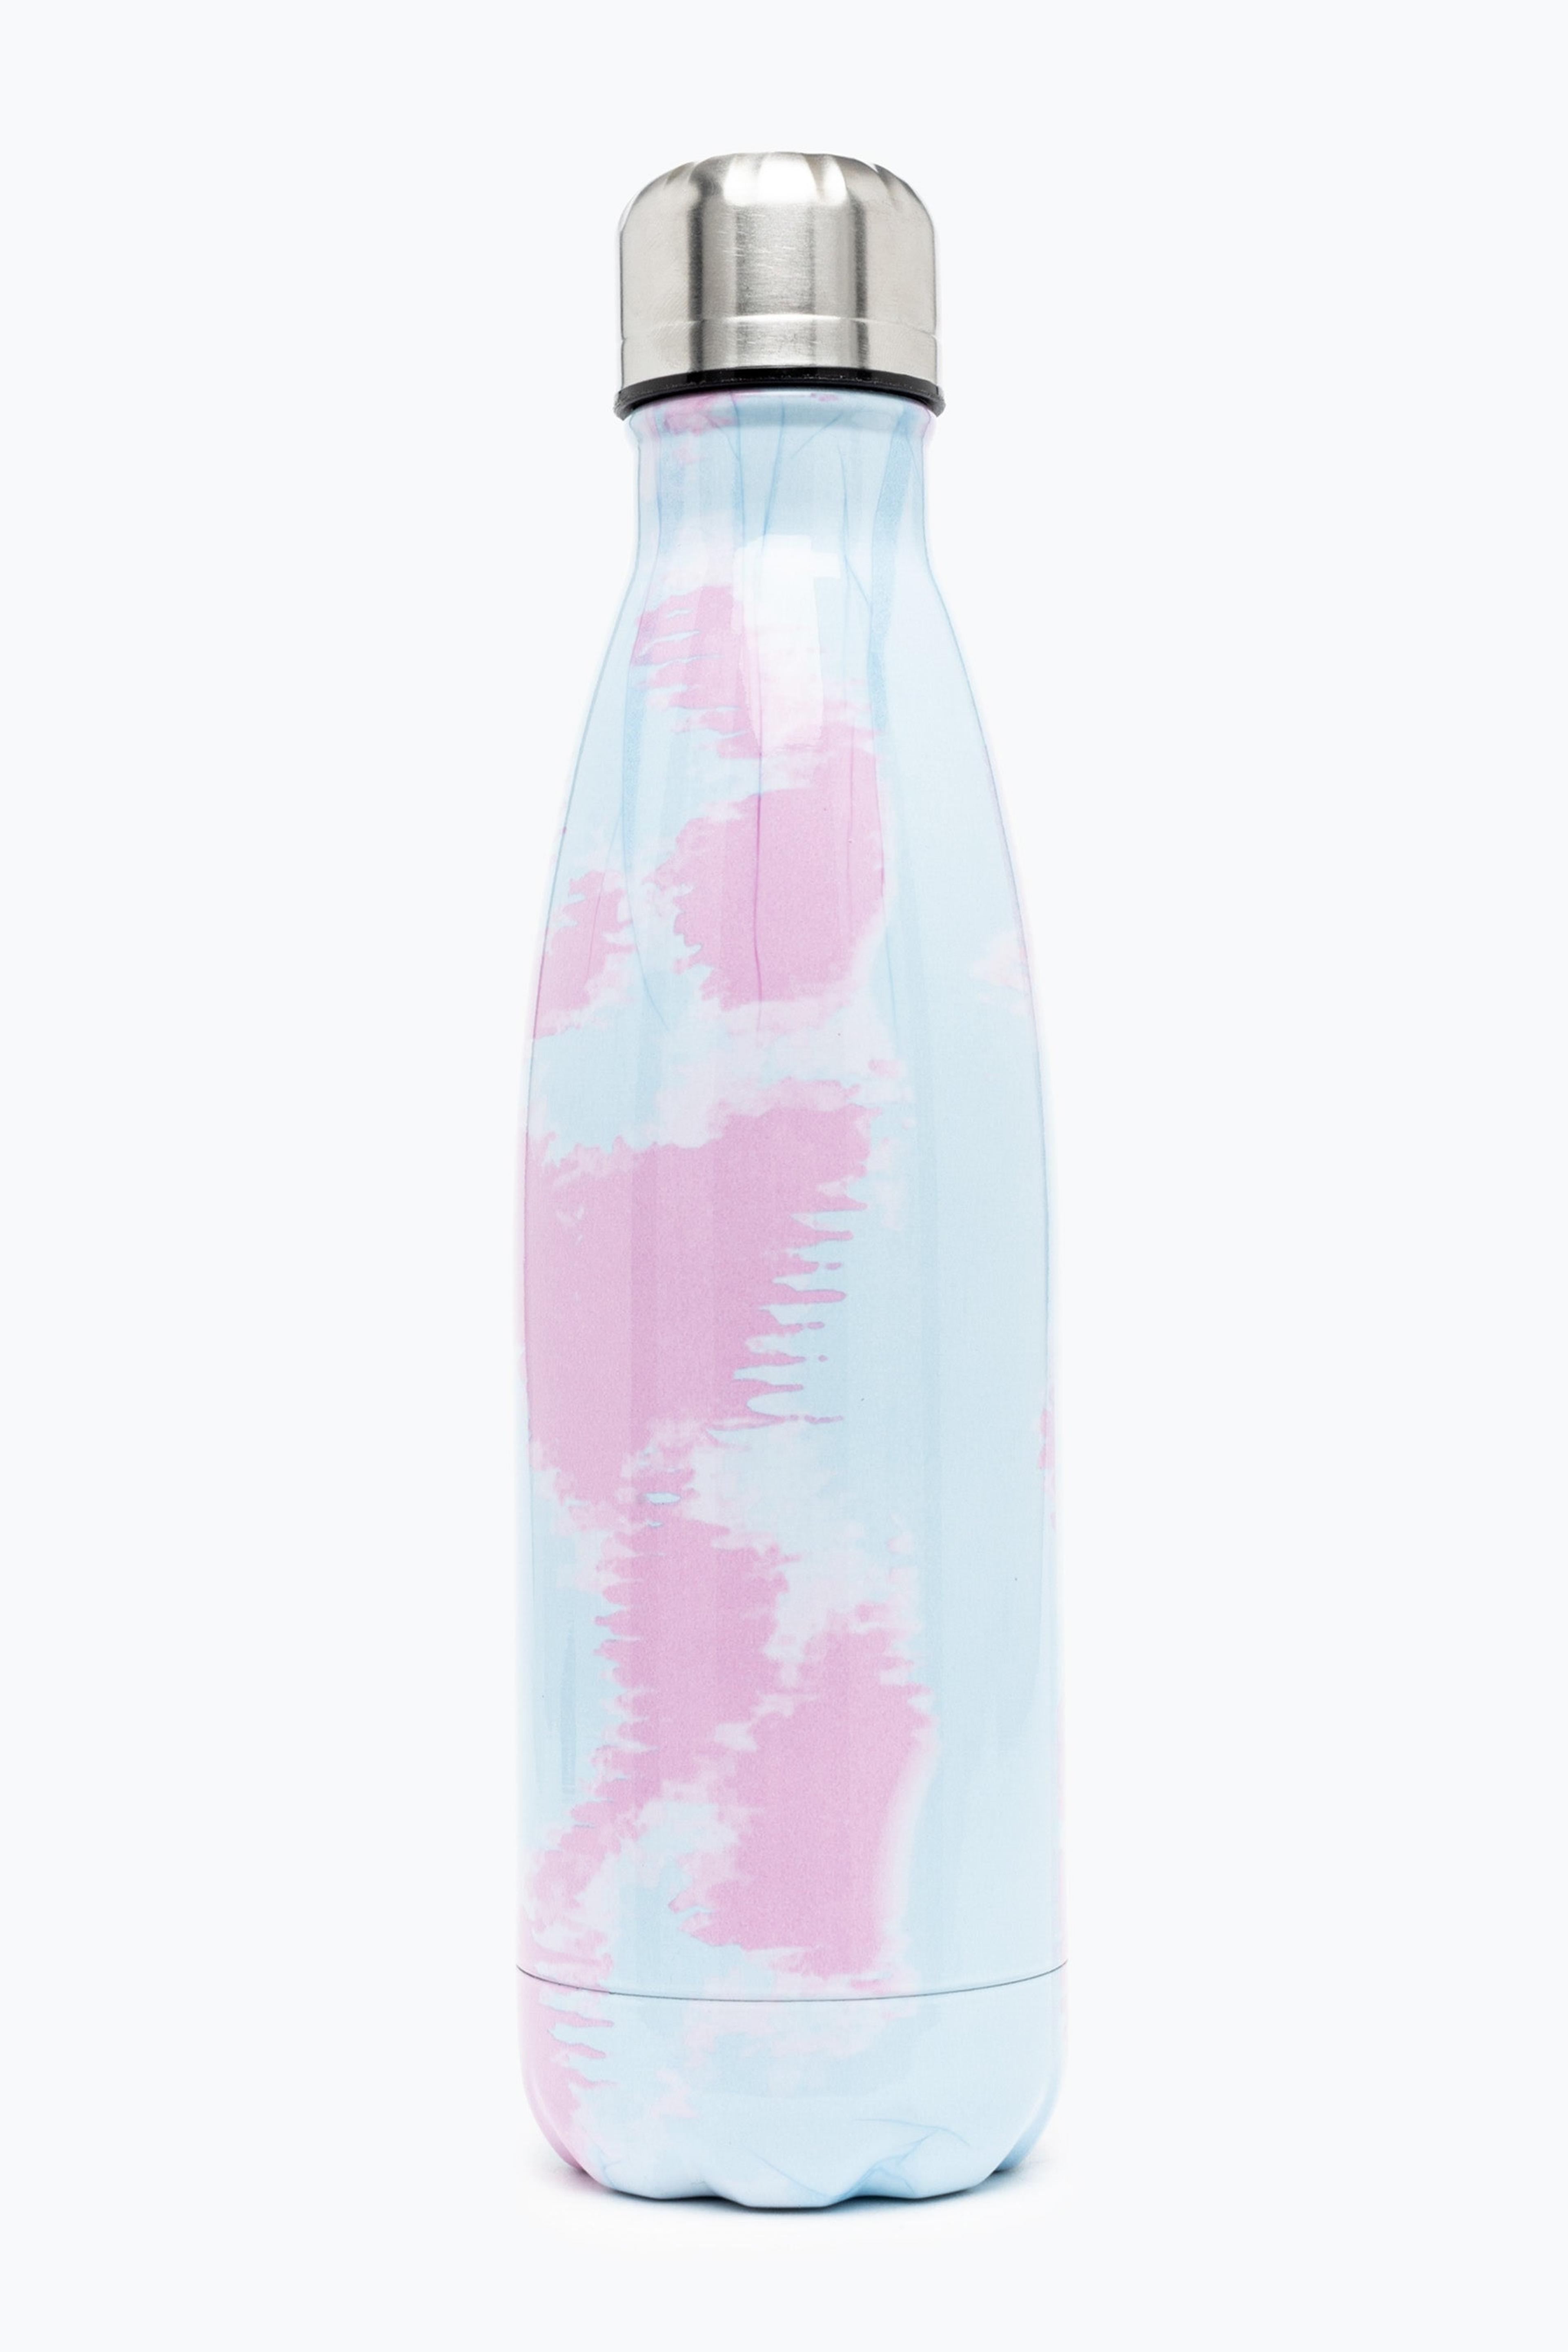 Alternate View 1 of HYPE UNISEX SPLODGE TIE DYE BLUE AND LILAC CREST BOTTLE